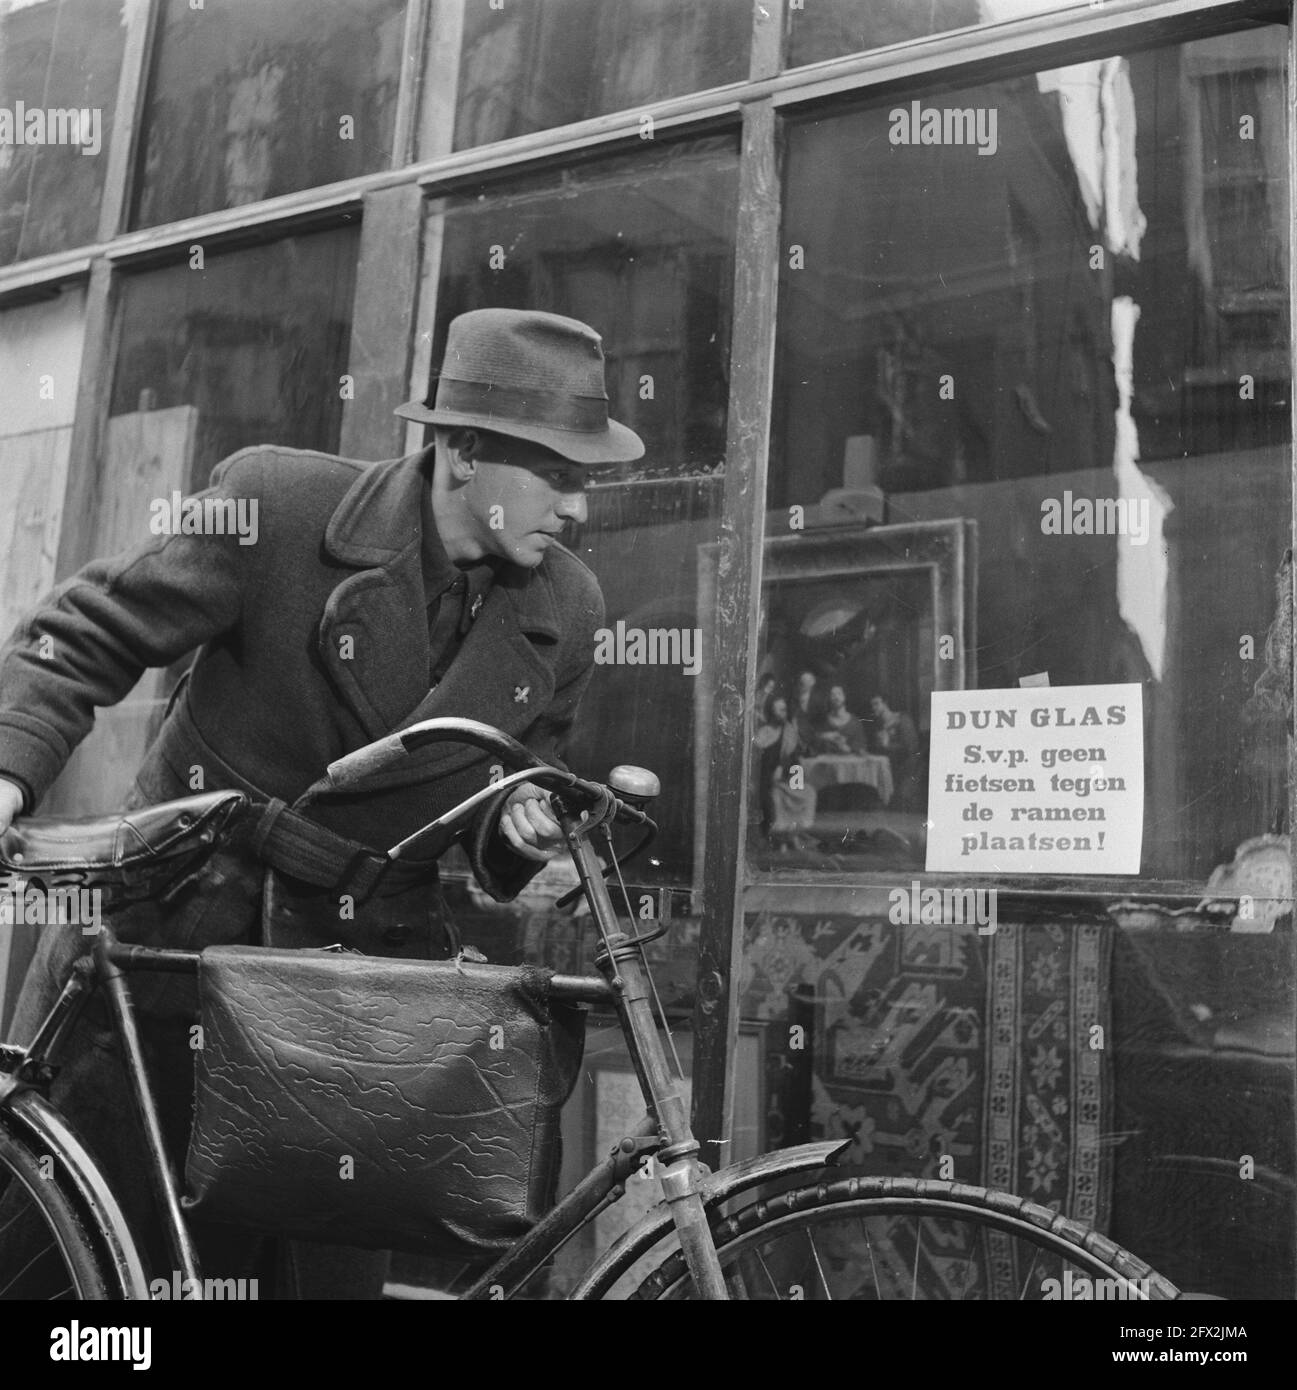 Man with bicycle reads message on window, May 6, 1946, bicycles, reconstruction, The Netherlands, 20th century press agency photo, news to remember, documentary, historic photography 1945-1990, visual stories, human history of the Twentieth Century, capturing moments in time Stock Photo